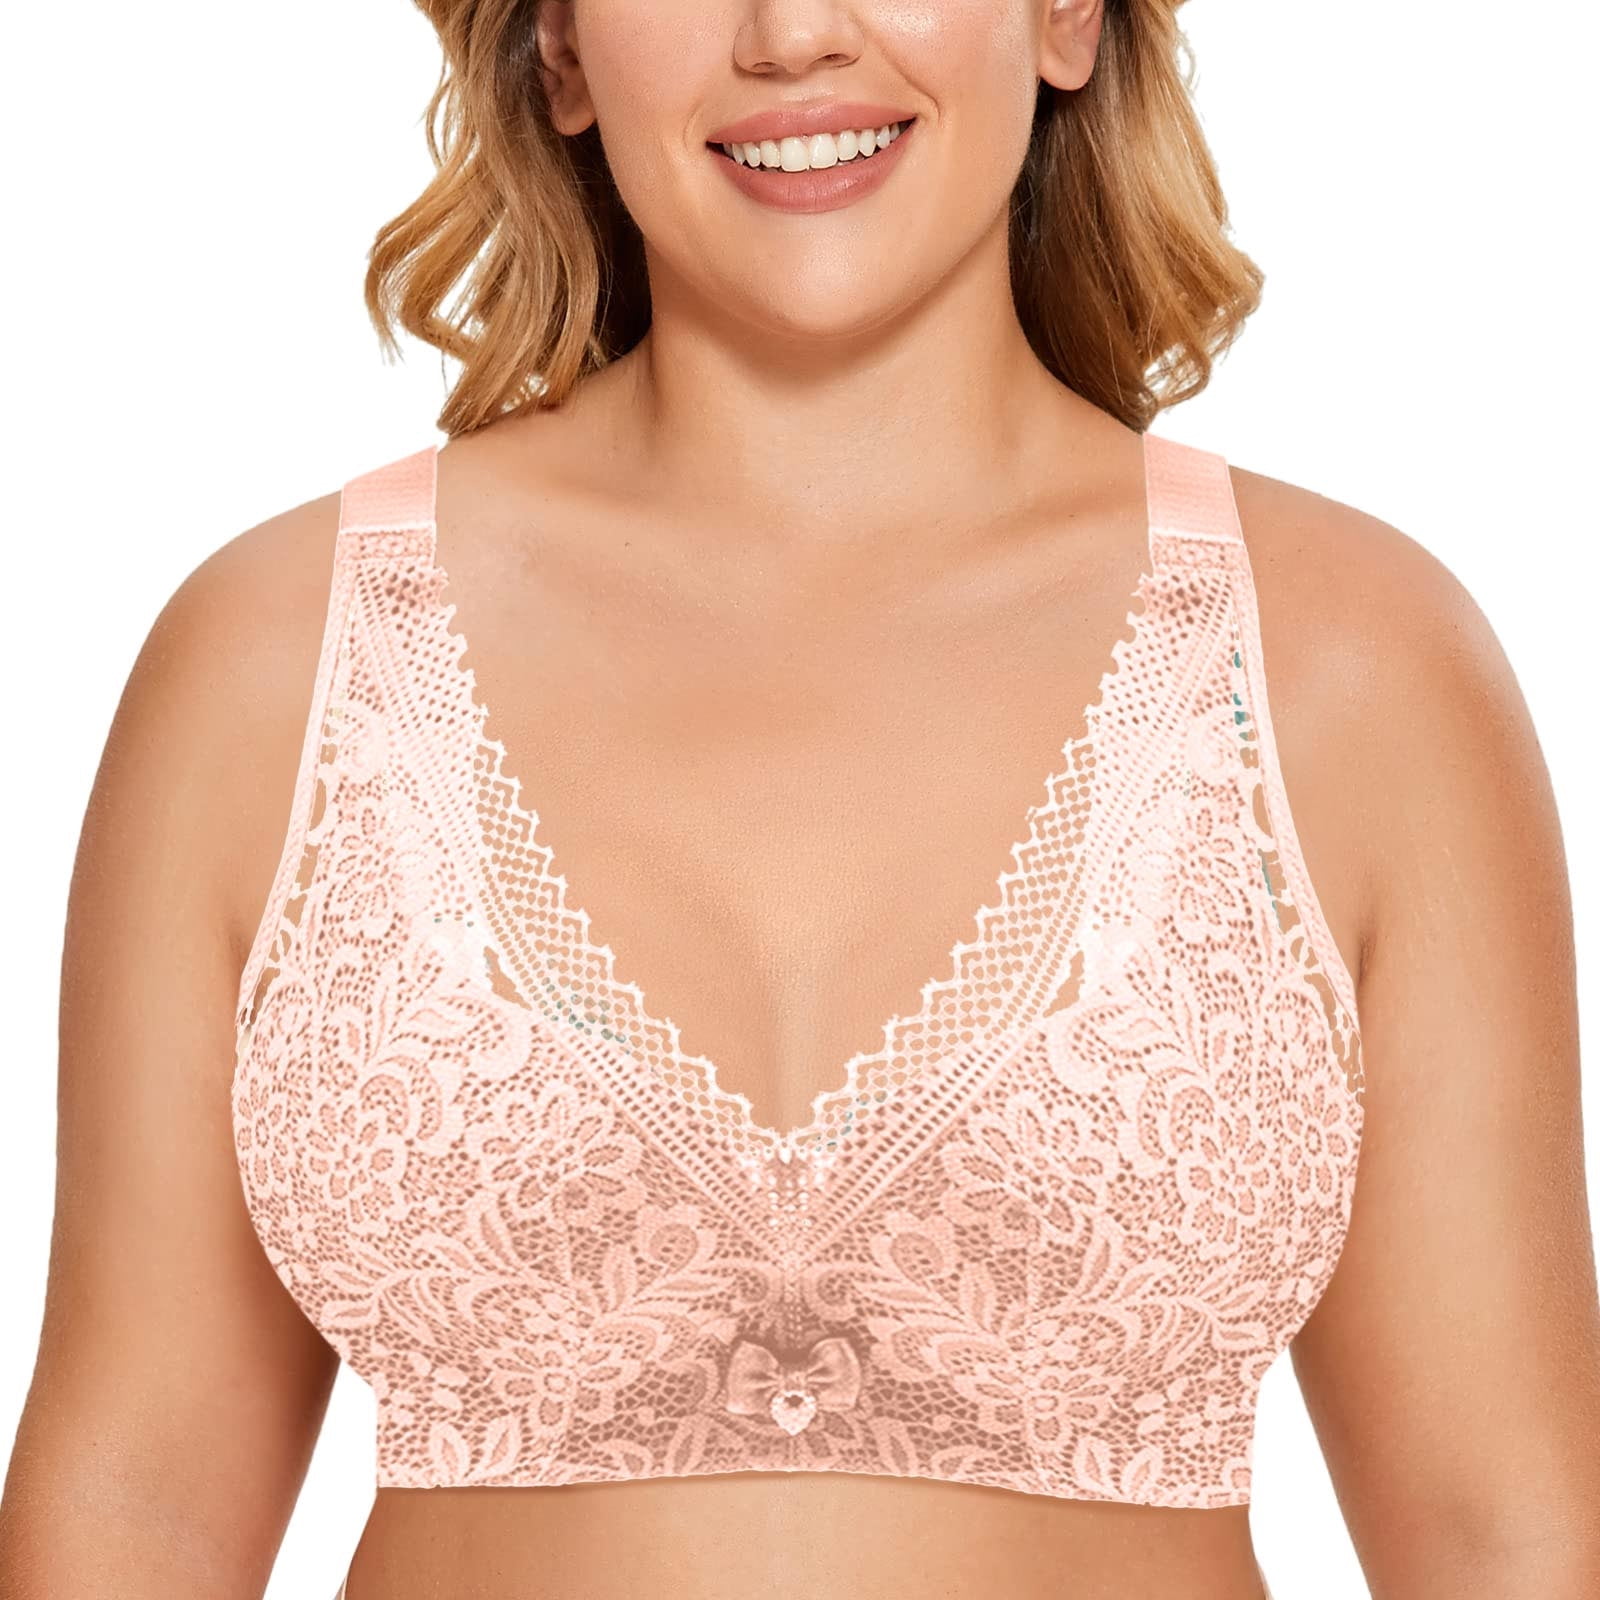  Womens Full Coverage Floral Lace Underwired Bra Plus Size  Non Padded Comfort Bra 48D Grey